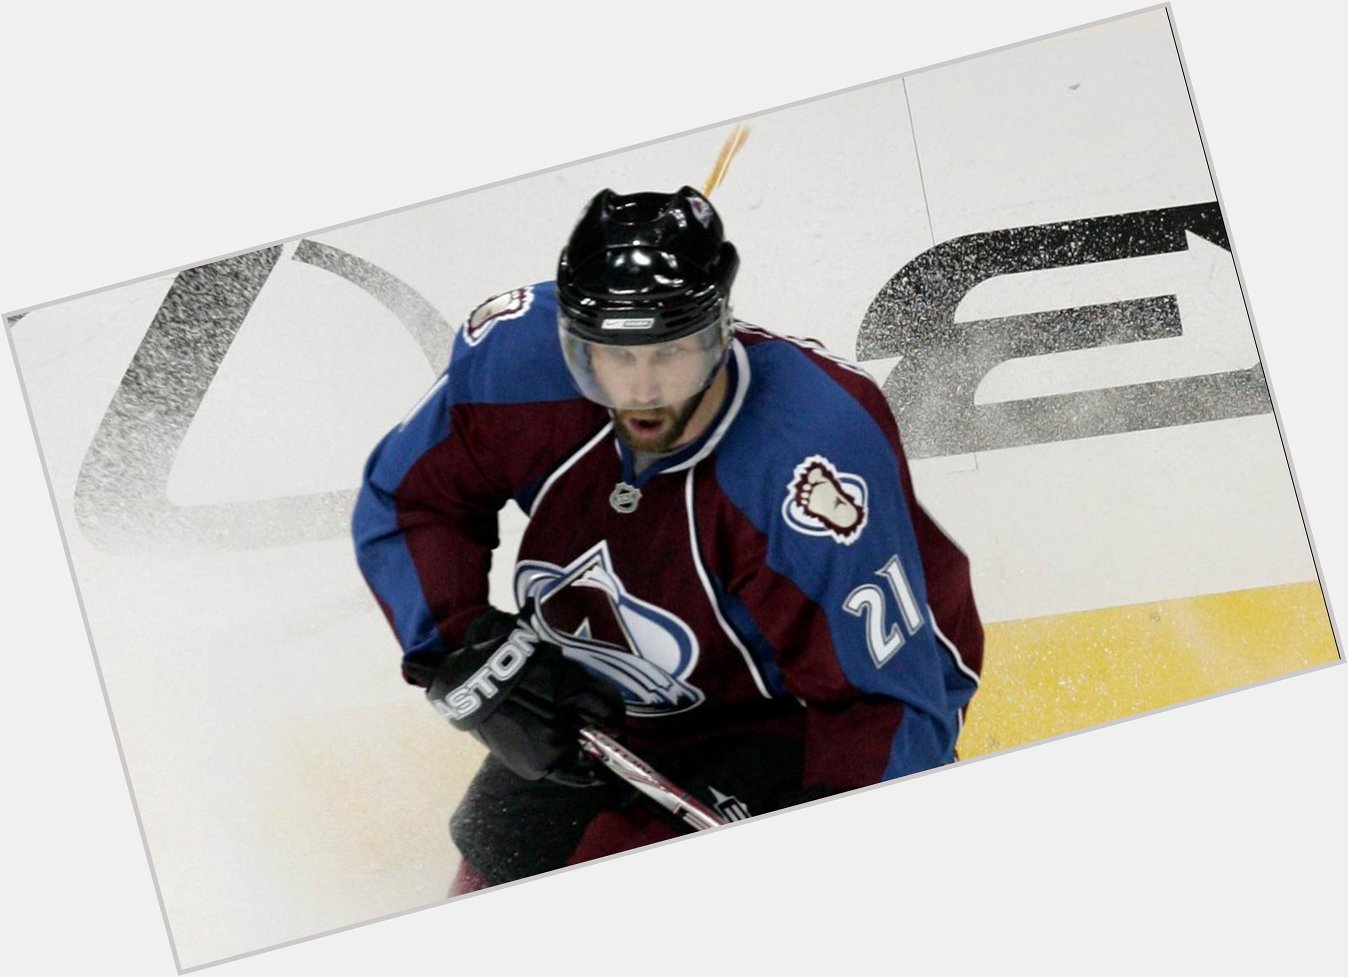 Happy 42nd birthday Peter Forsberg! He\s the only member of the Triple Gold Club to also win the Calder & Hart Trophy 